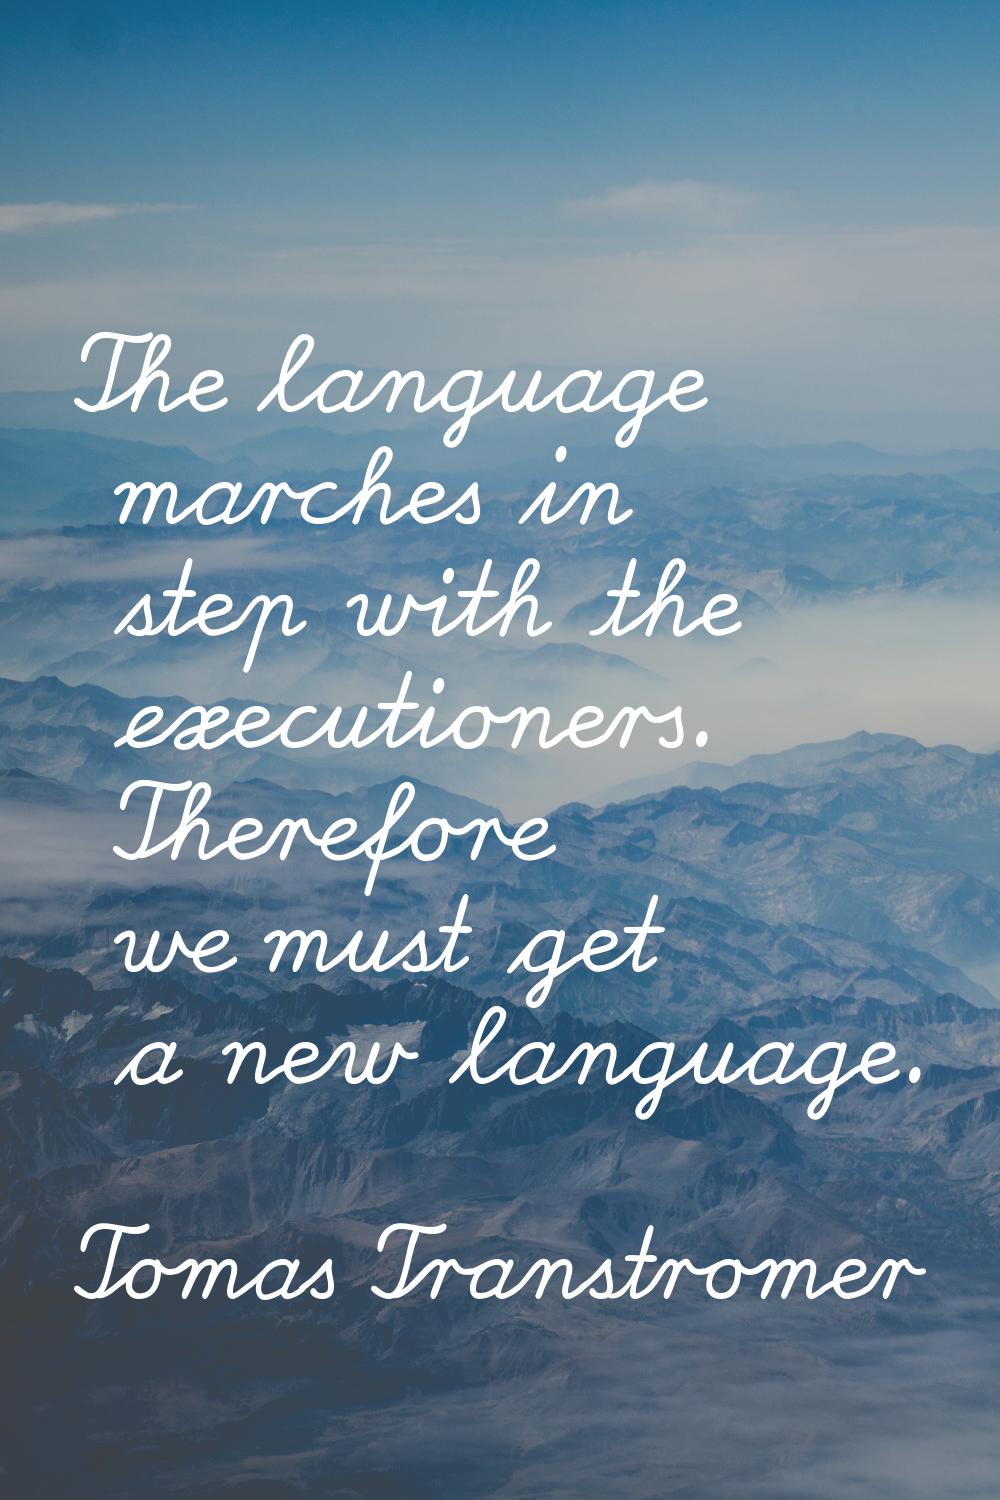 The language marches in step with the executioners. Therefore we must get a new language.